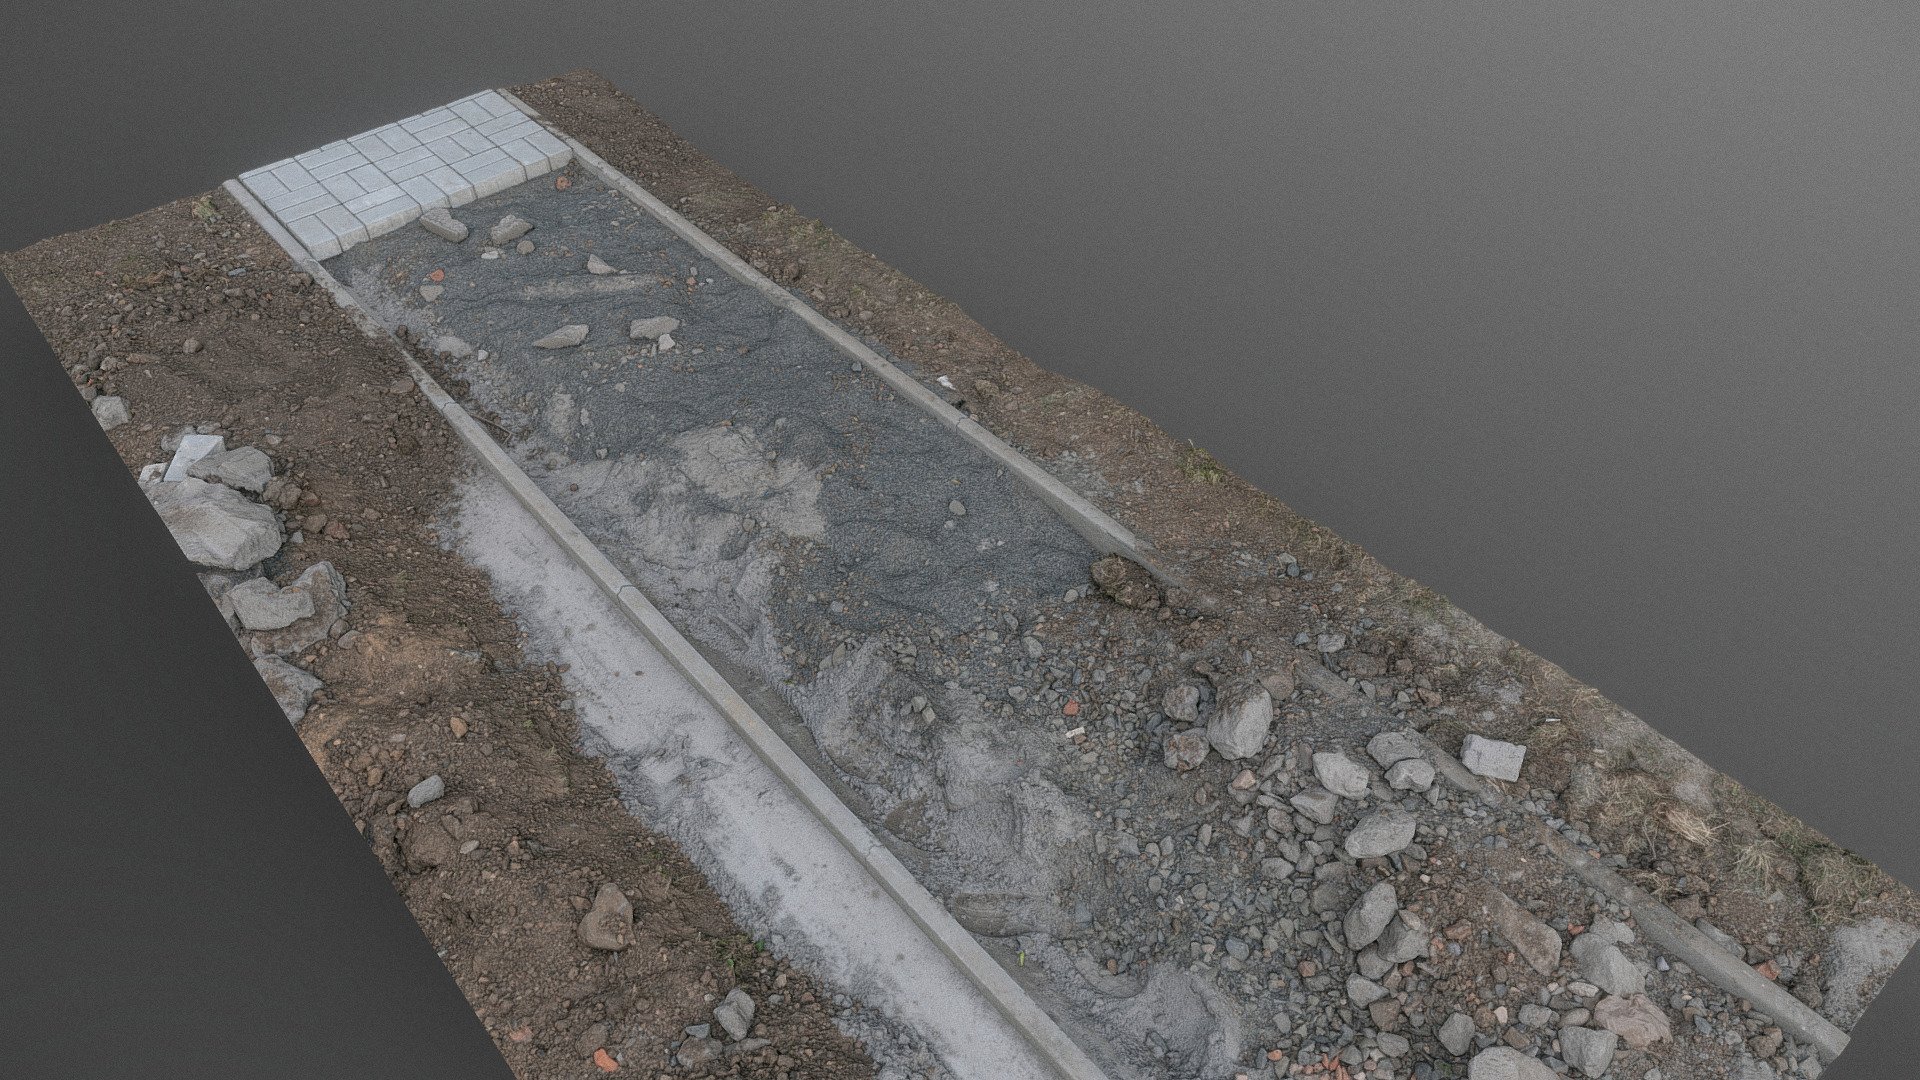 Sidewalk pavement construction site, concrete base with lock tiles building ground earth work, dug-out trench ditch, technical site inspection

Photogrammetry scan 210 x 36MP, 5x8K textures + HD normals - Sidewalk construction - Buy Royalty Free 3D model by matousekfoto 3d model